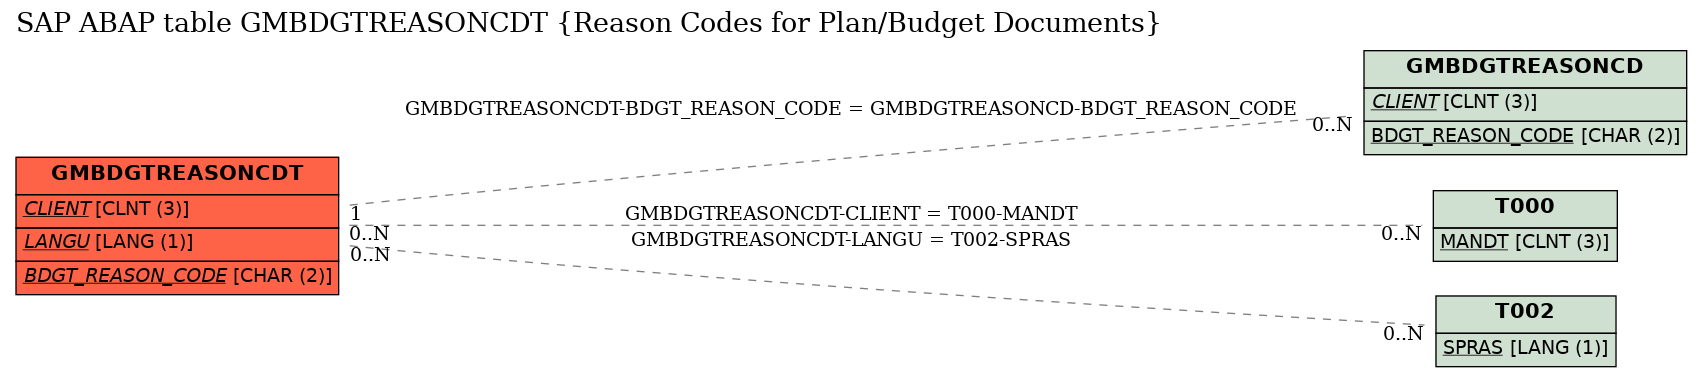 E-R Diagram for table GMBDGTREASONCDT (Reason Codes for Plan/Budget Documents)